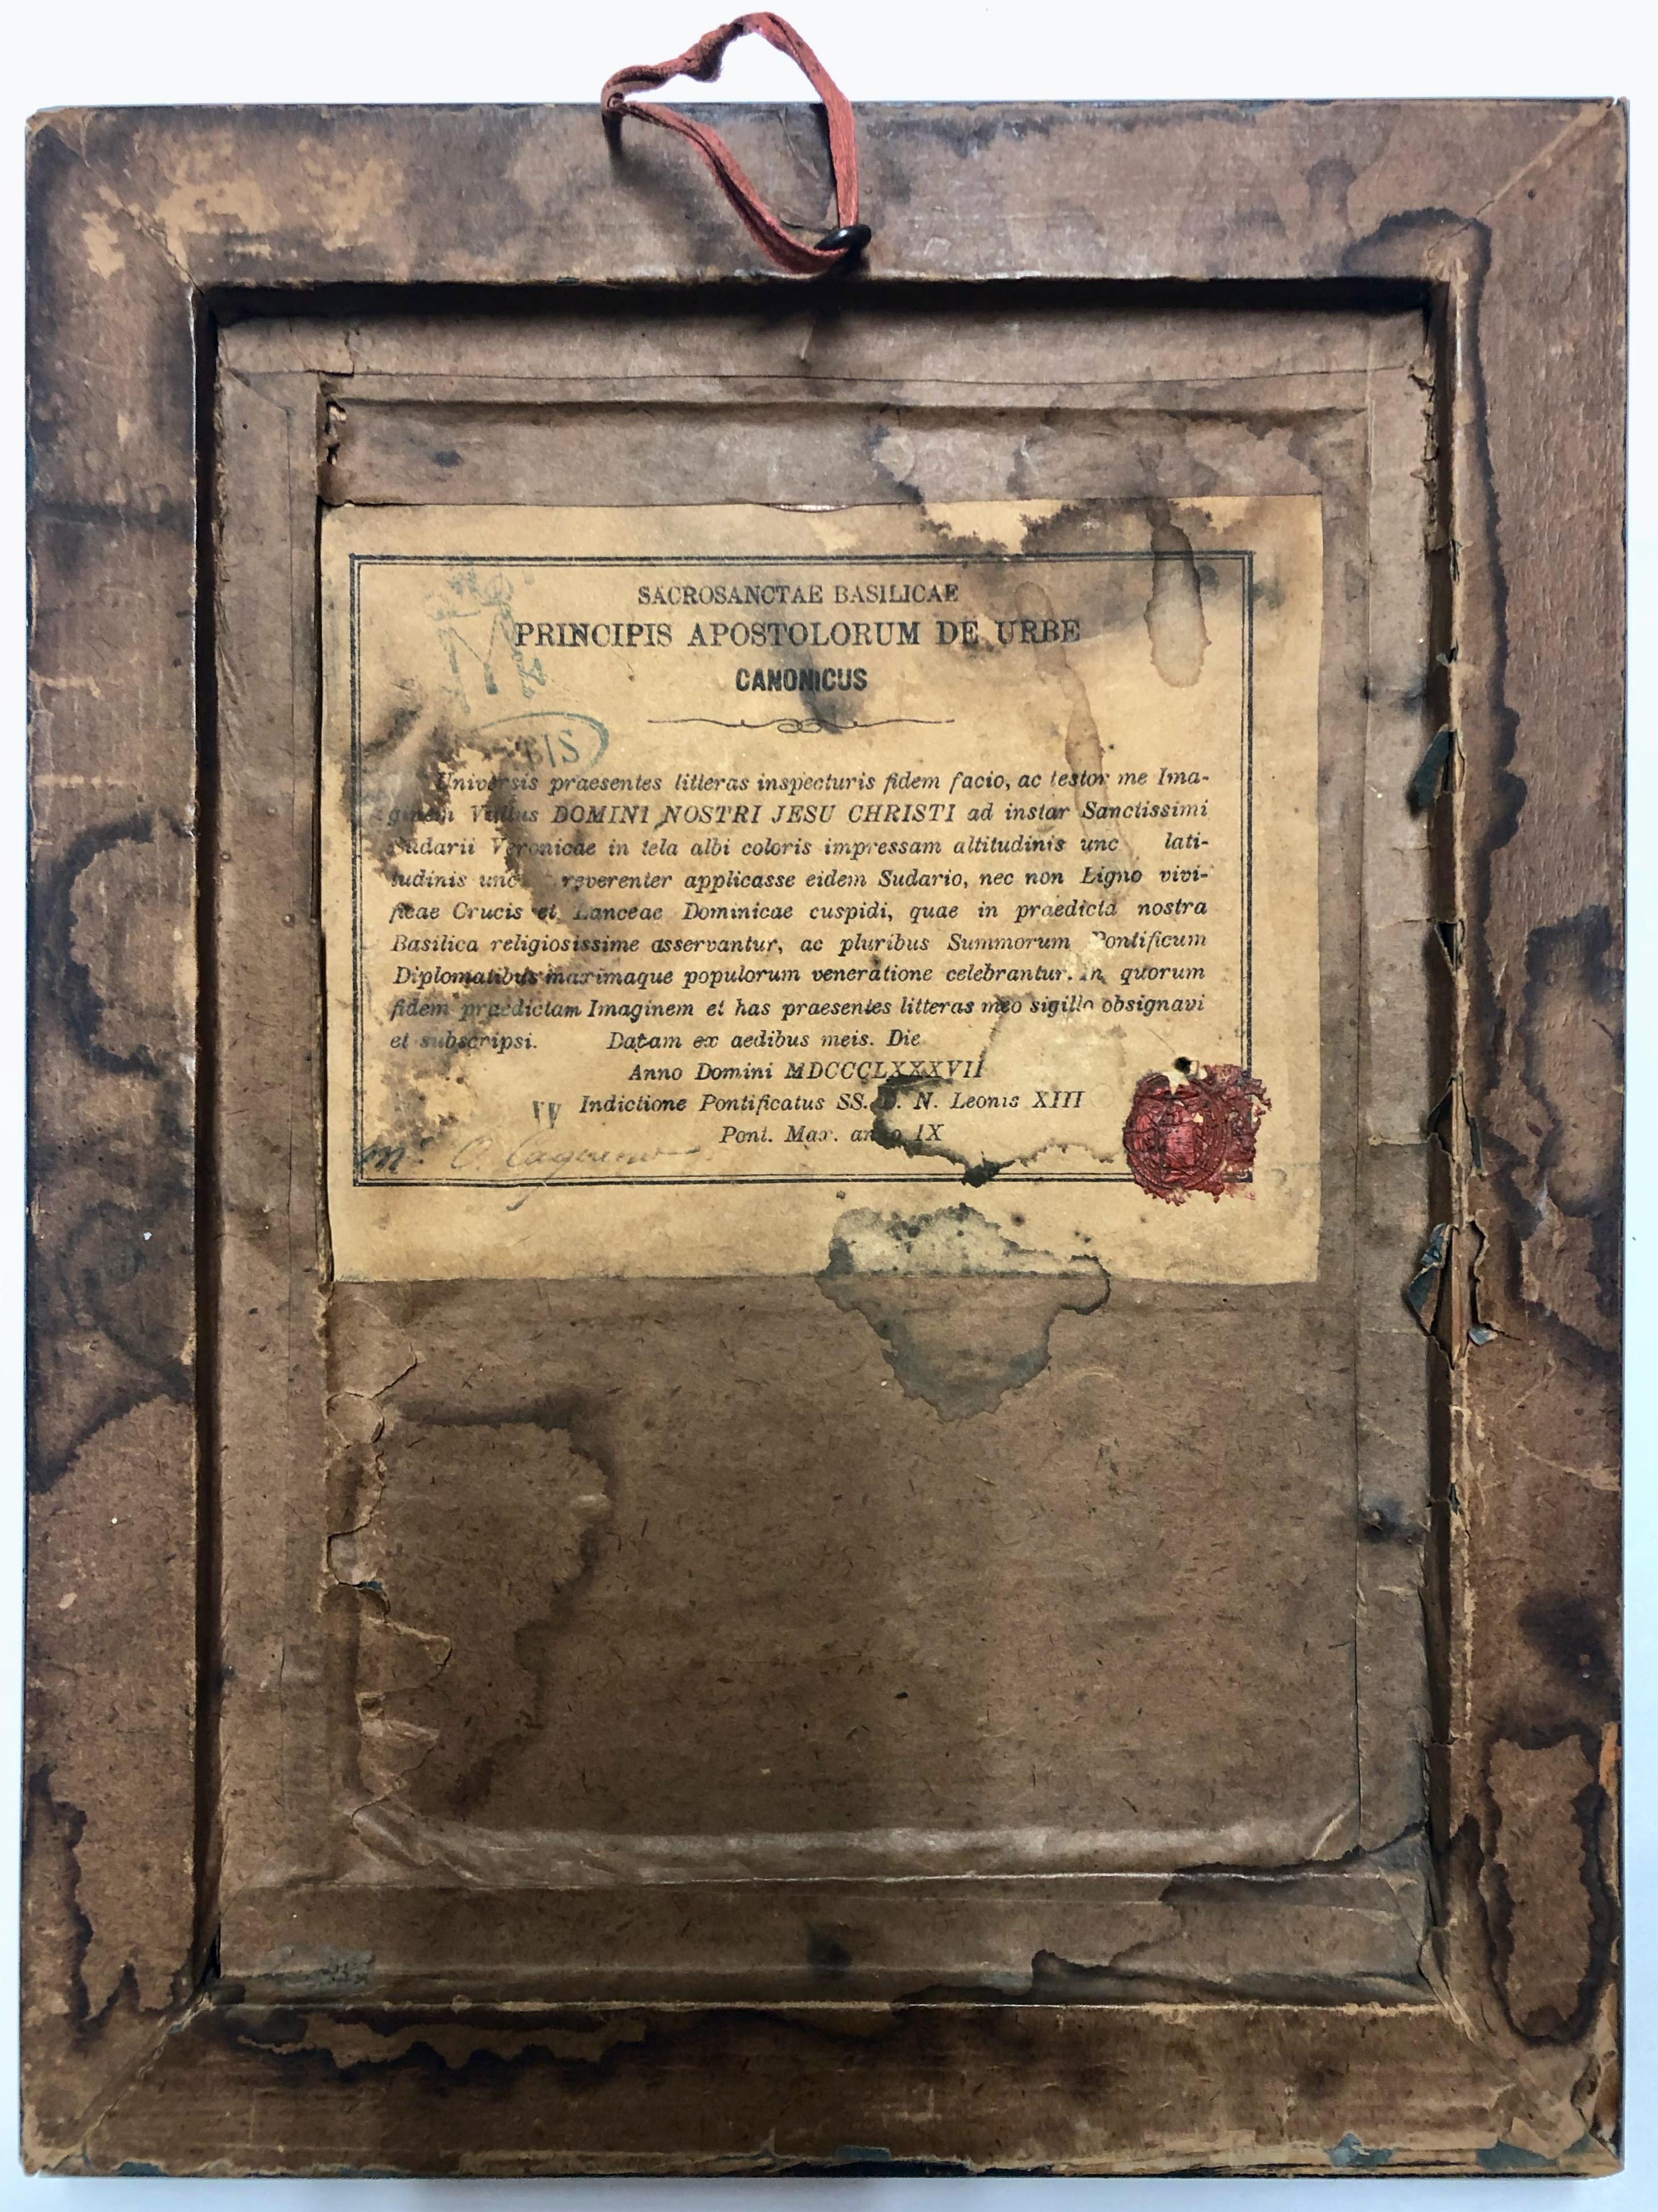 Framed Relic Image of Veronica's Veil, with Vatican Seal and Stamp, Verso 2